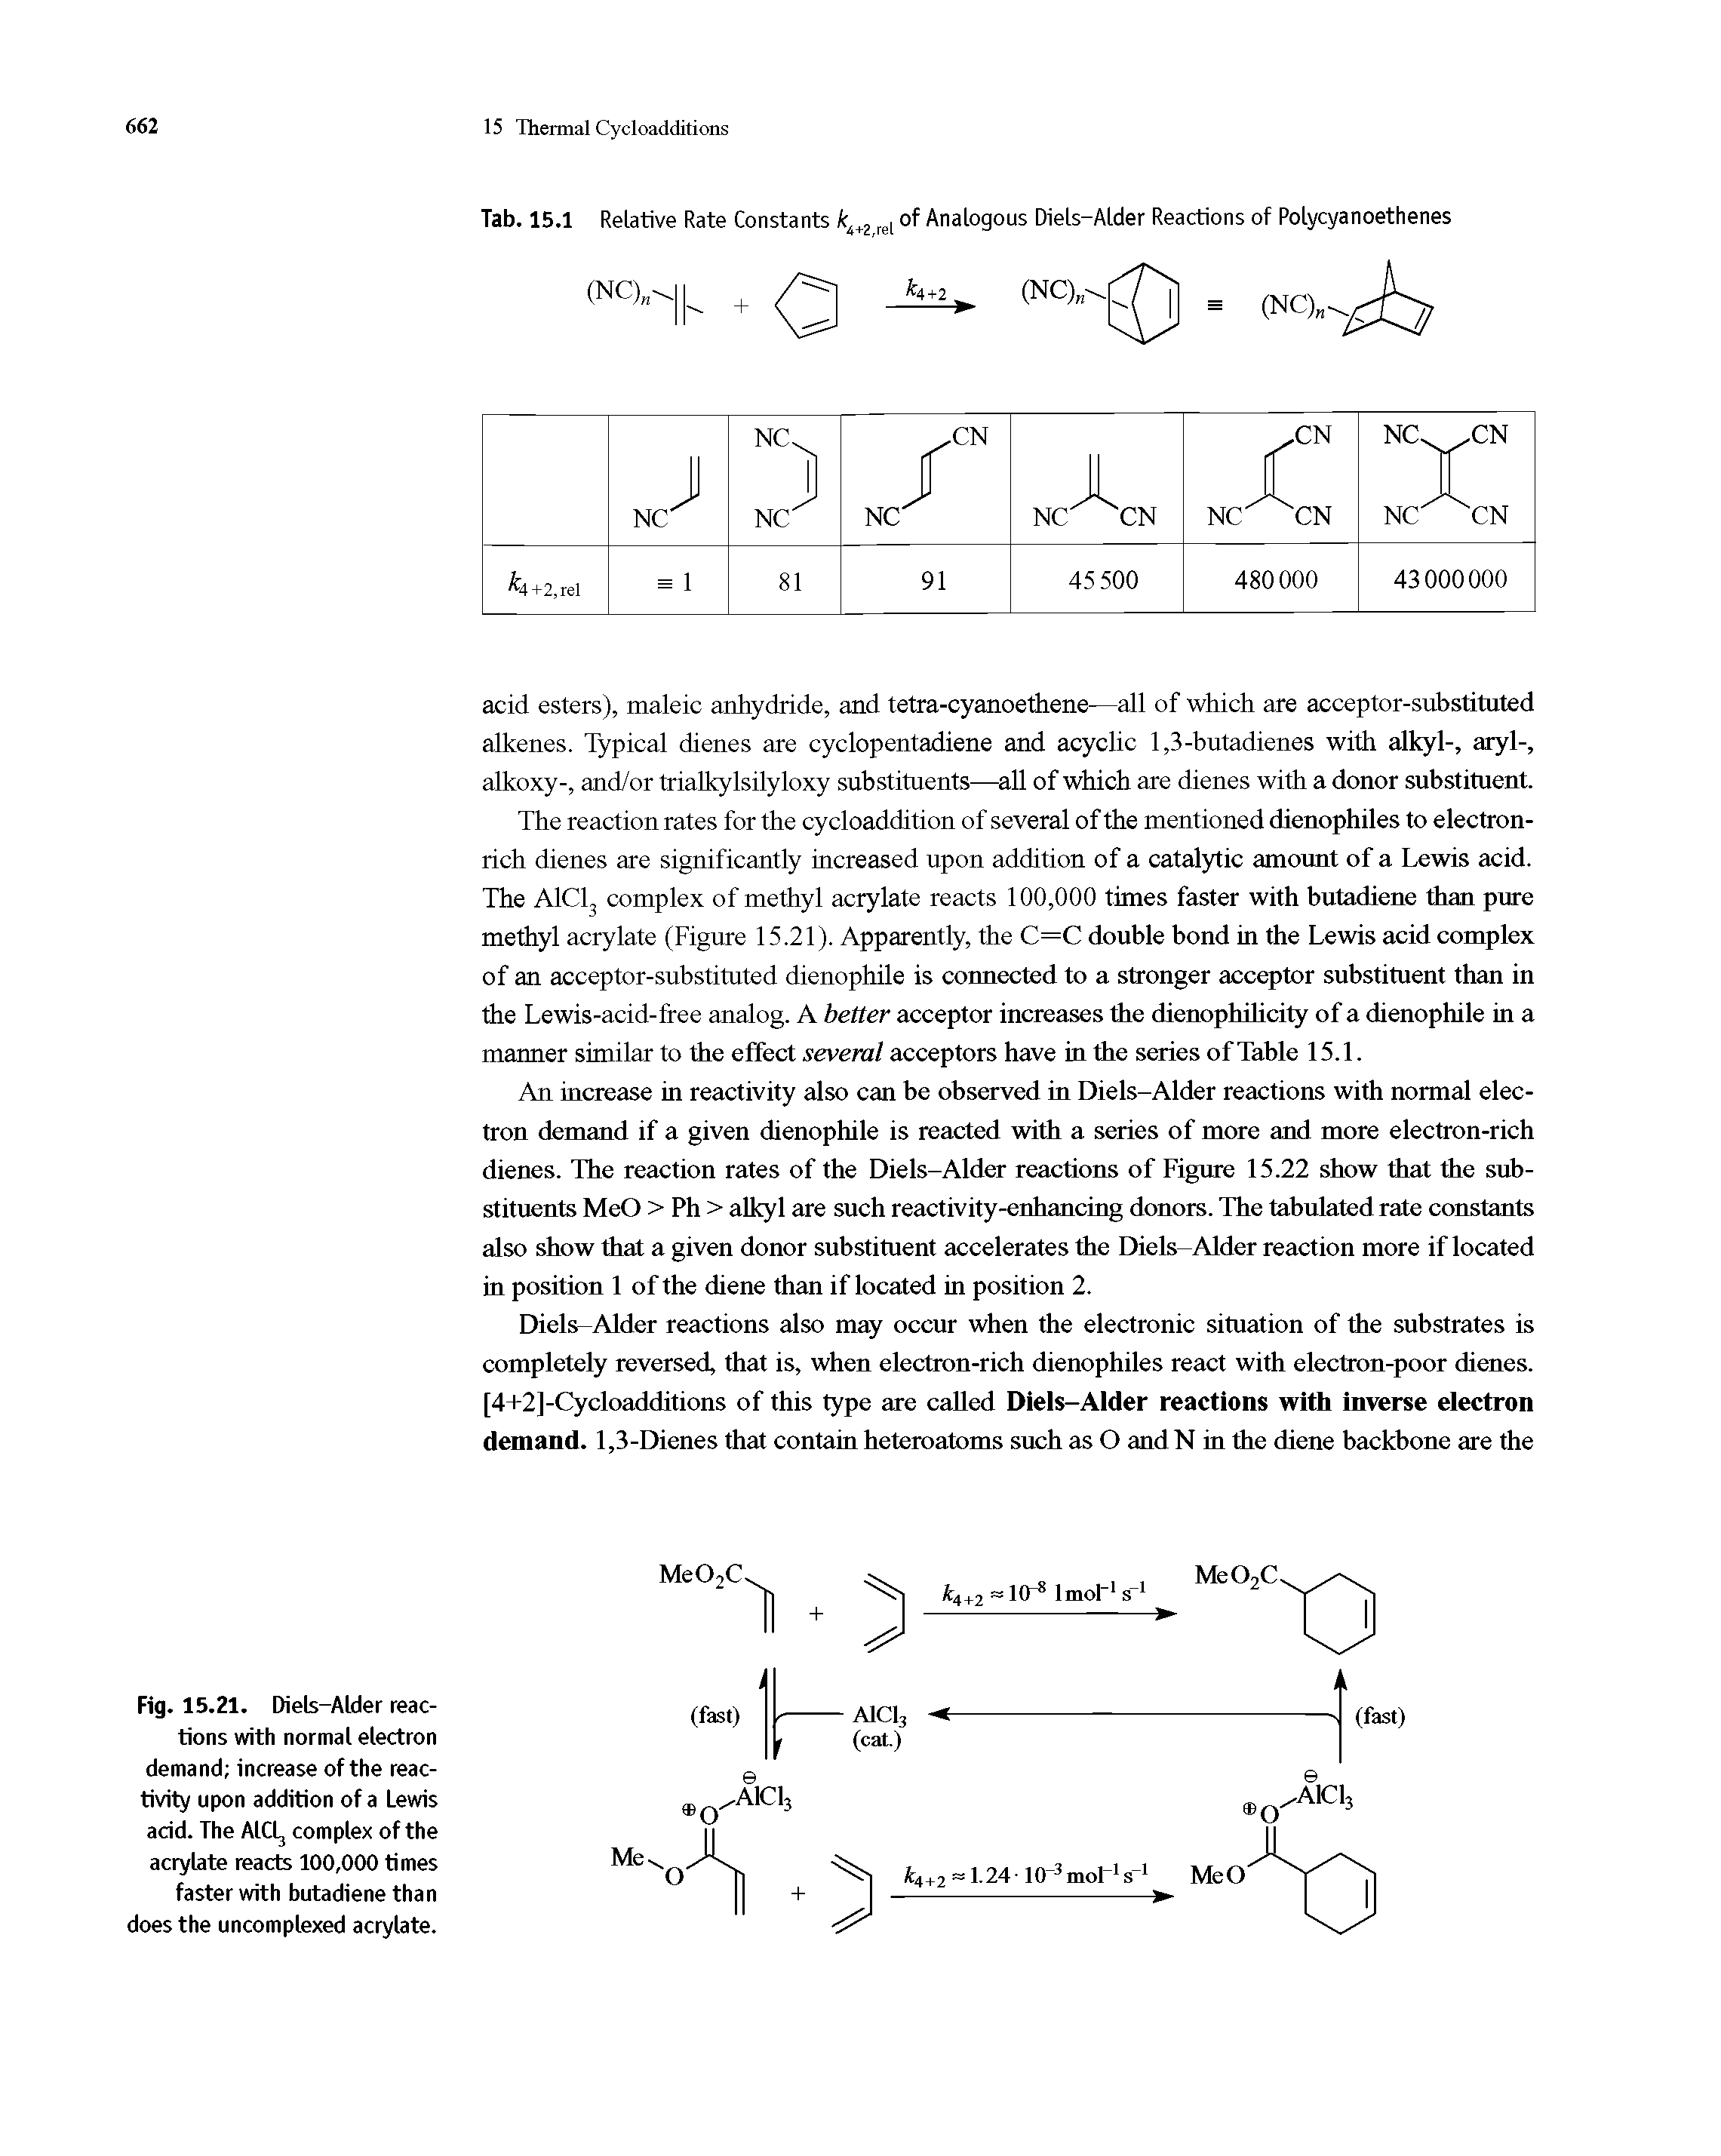 Fig. 15.21. Diels-Alder reactions with normal electron demand increase of the reactivity upon addition of a Lewis acid. The AlClj complex of the acrylate reacts 100,000 times faster with butadiene than does the uncomplexed acrylate.